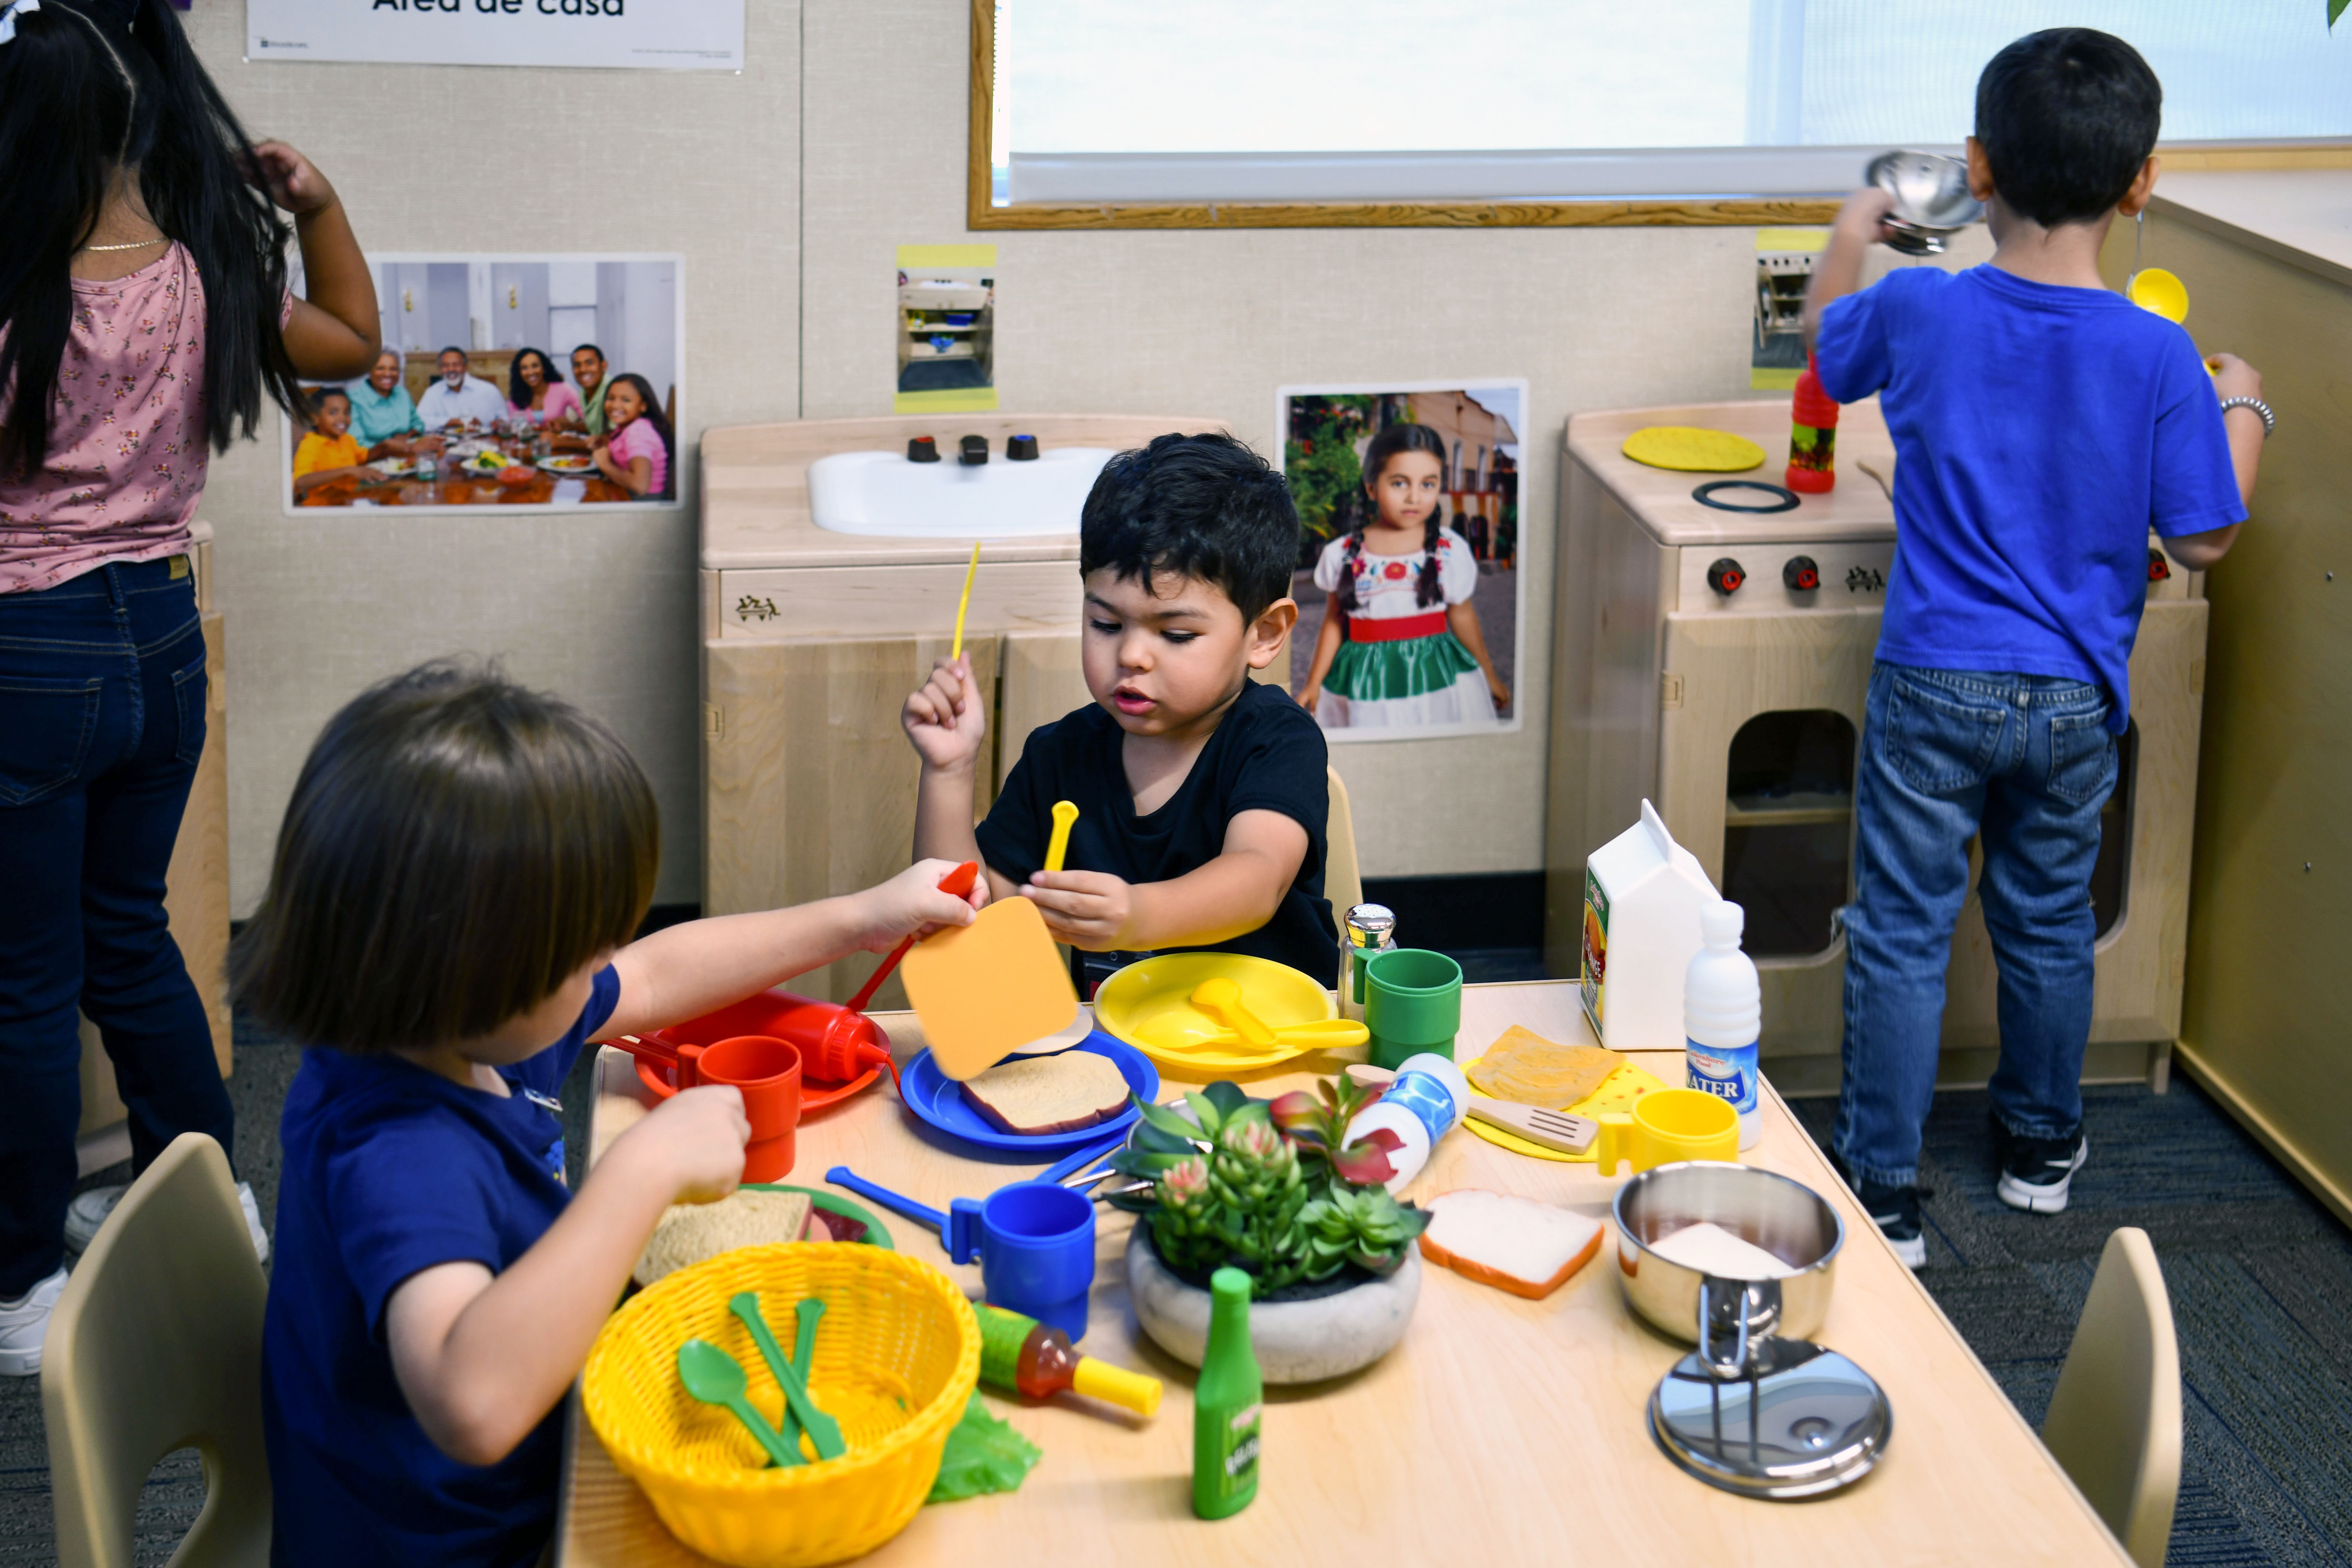 Sunnyslope preschool students play in the home area